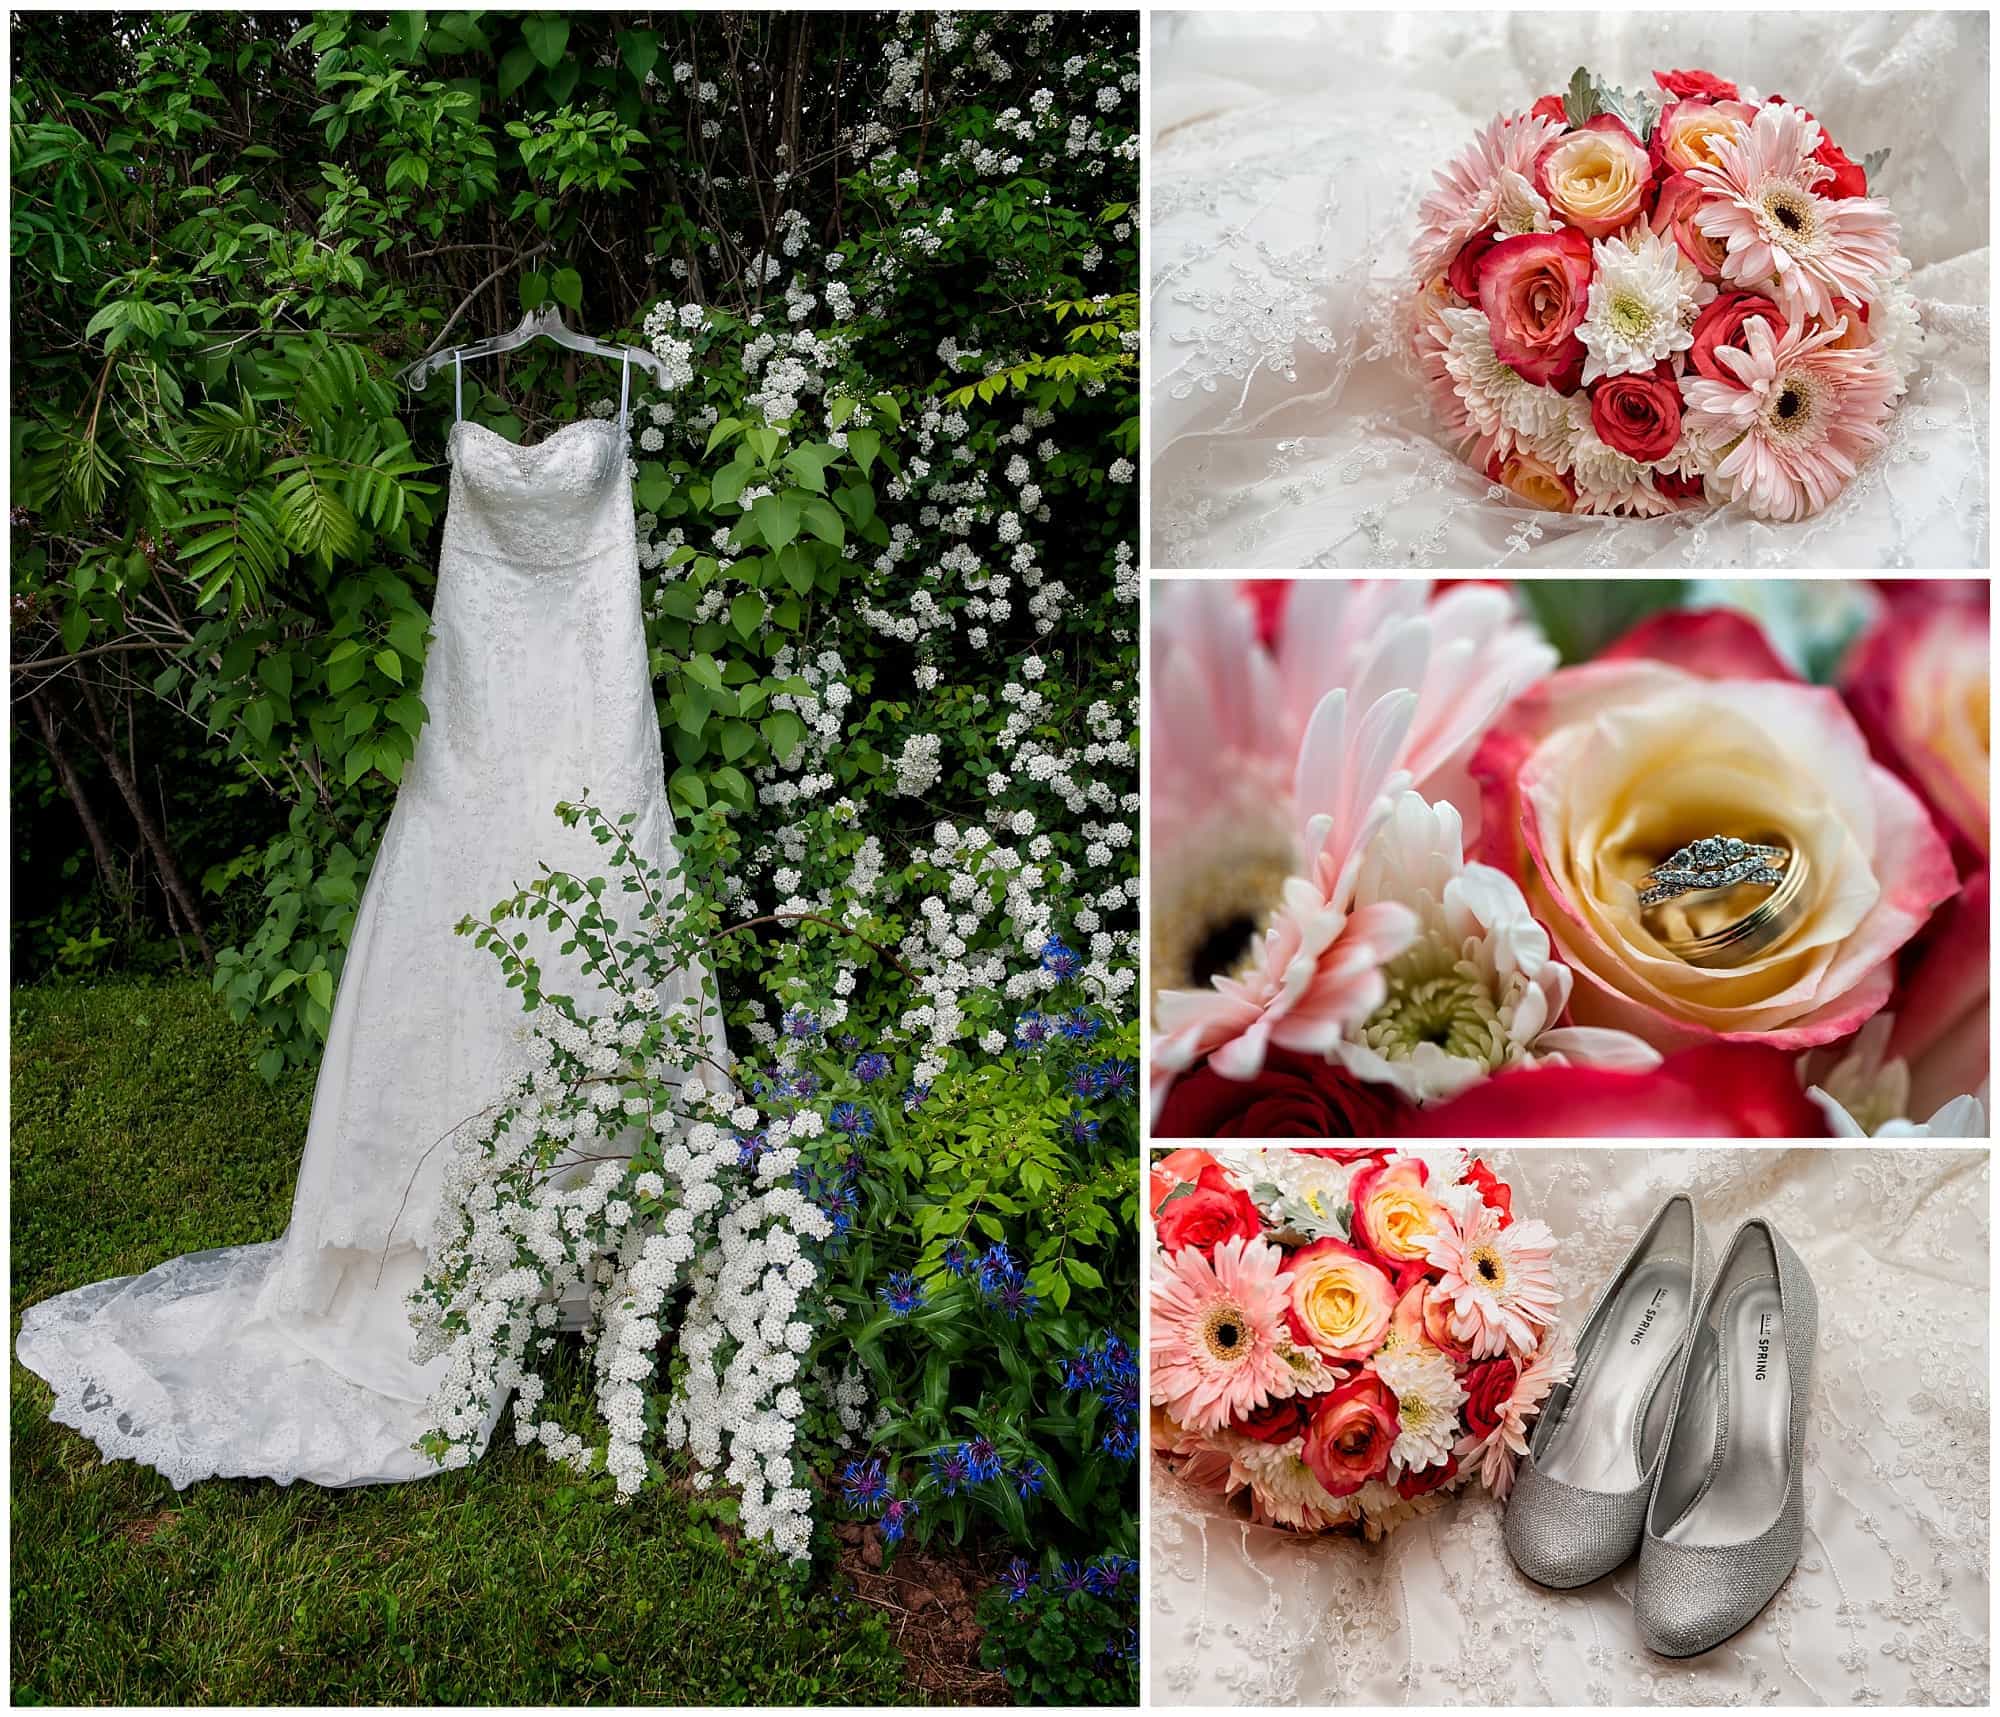 A collage of the bride's wedding dress, bridal bouquet, wedding shoes and wedding rings among the flower.